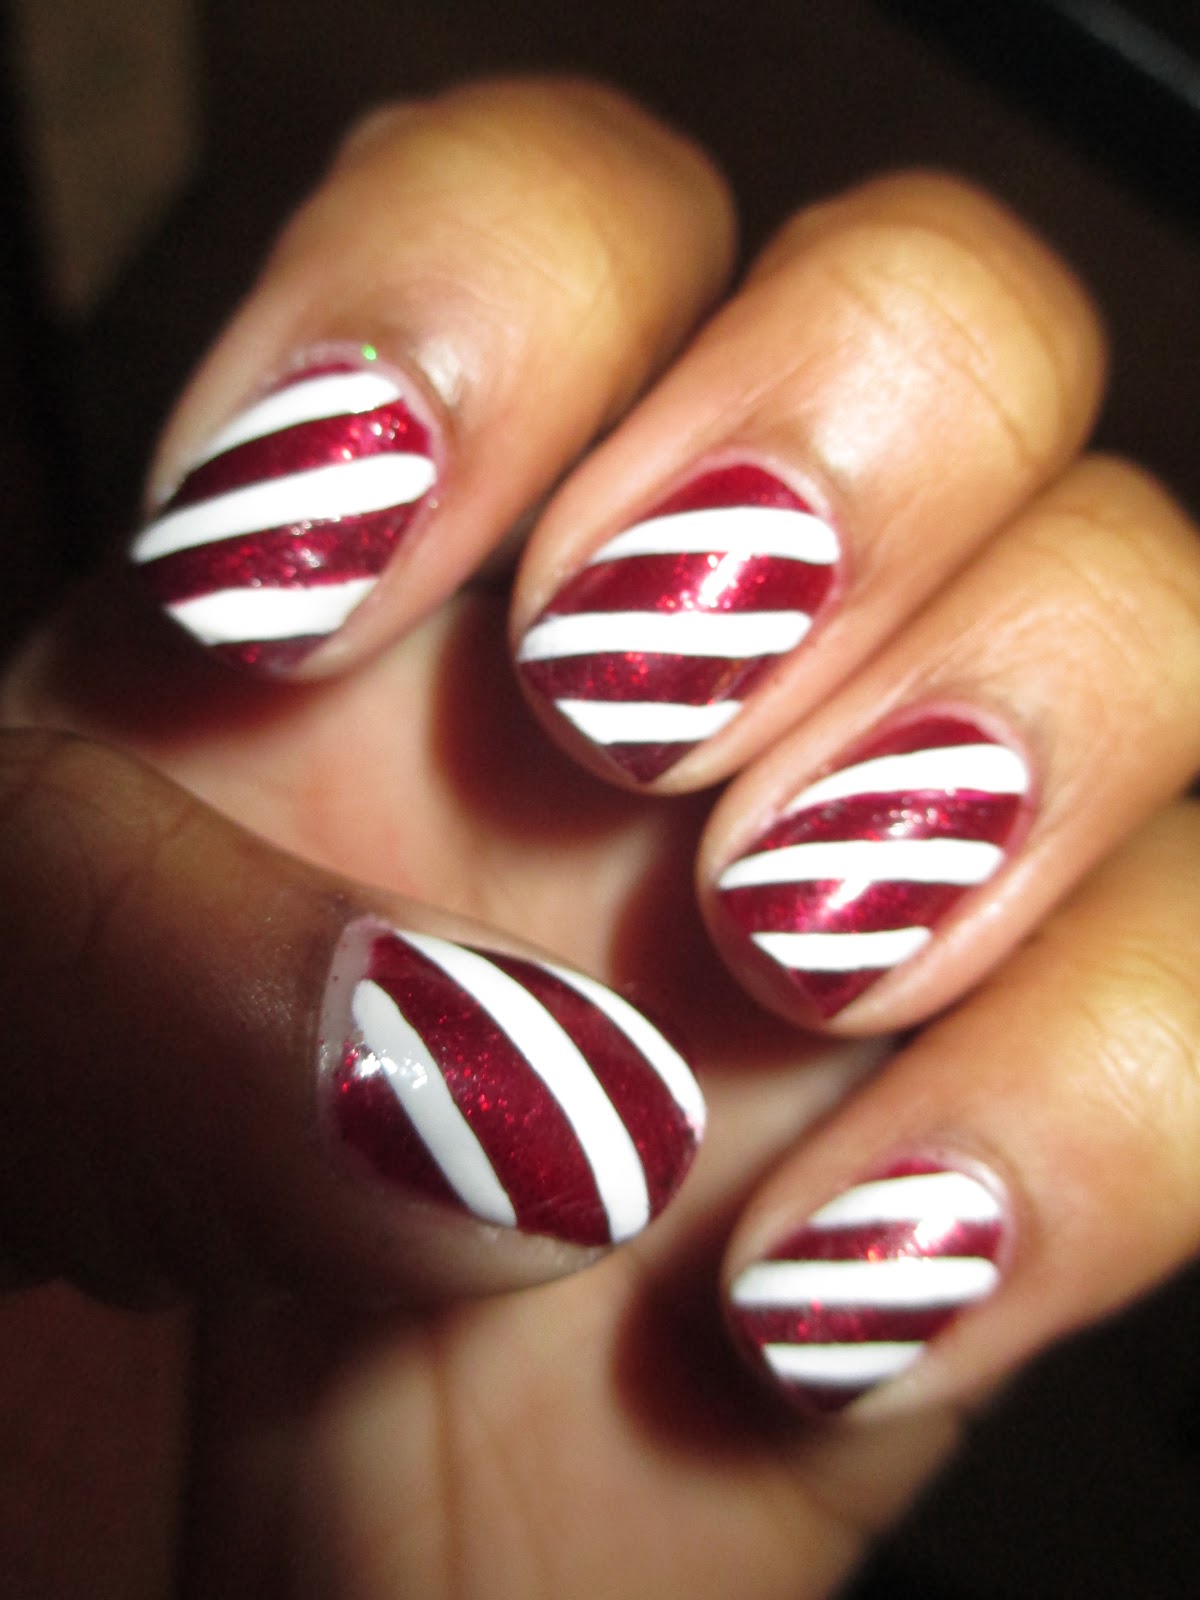 Fairly Charming: 12 Mani's of Christmas #7... Candy Canes!